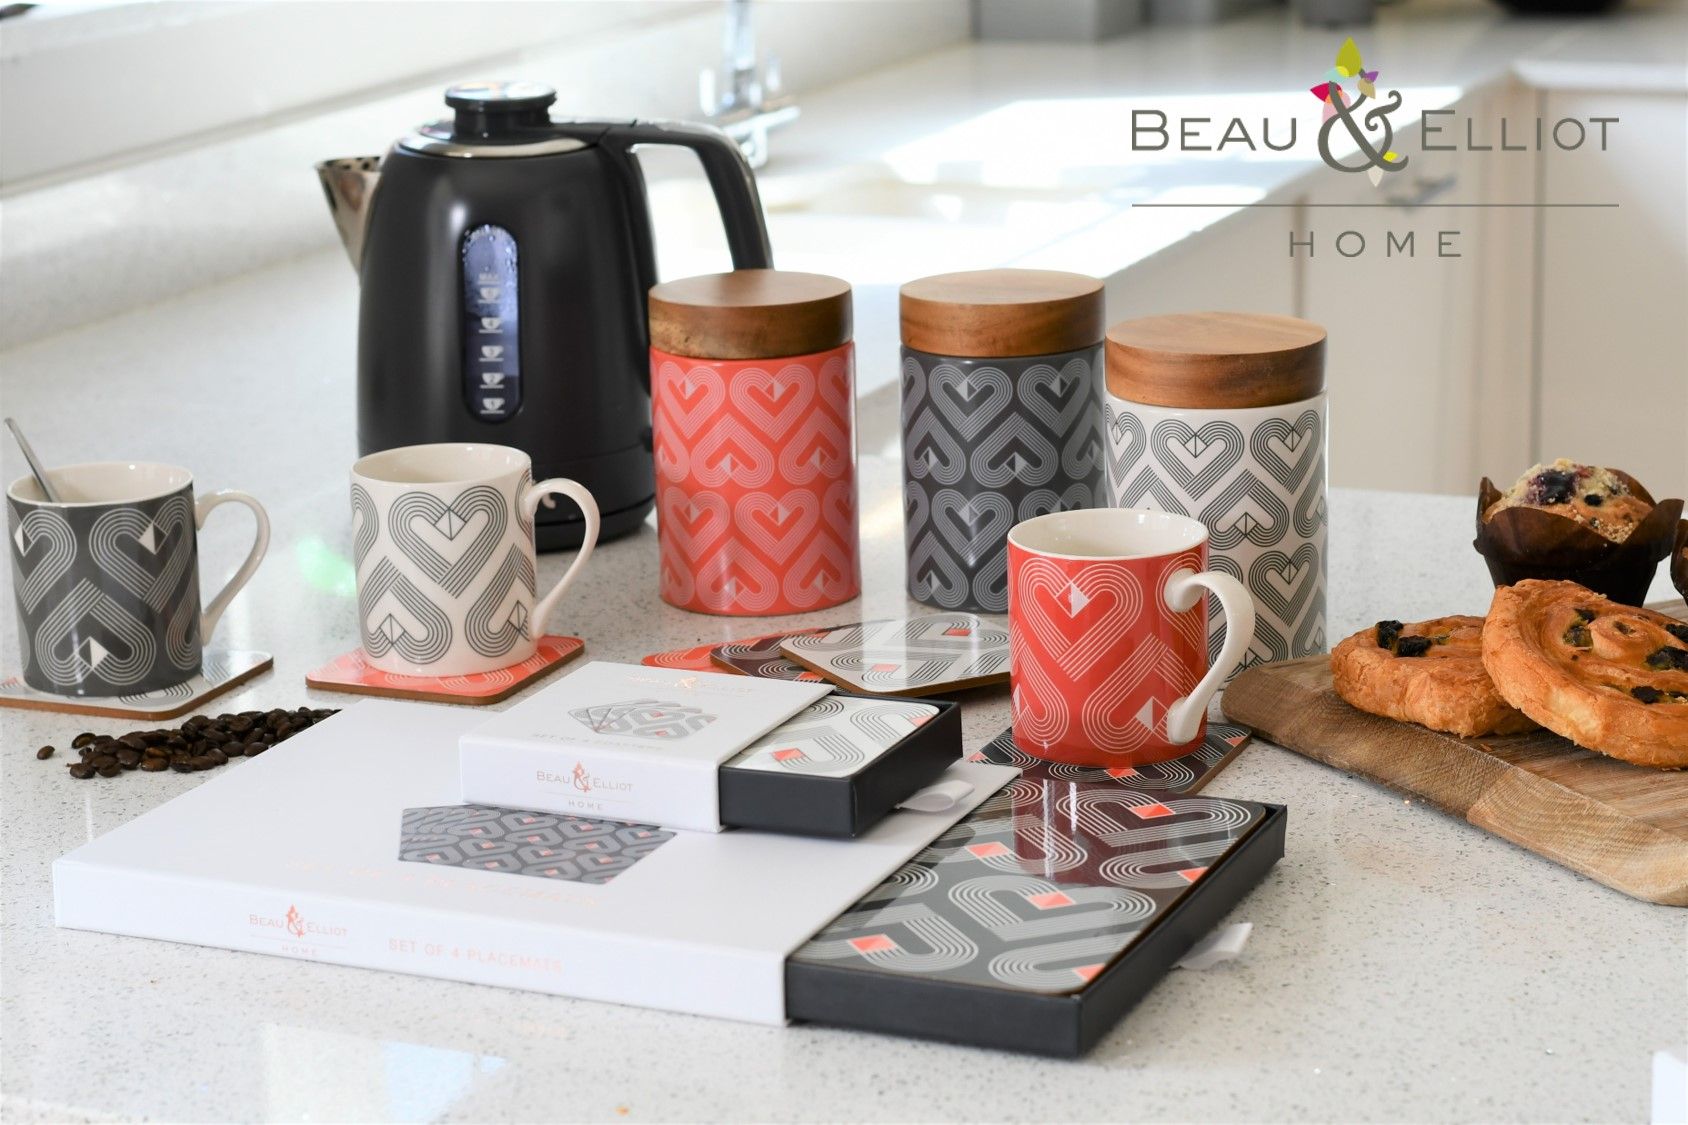 Beau & Elliot 'Vibe' home and gift